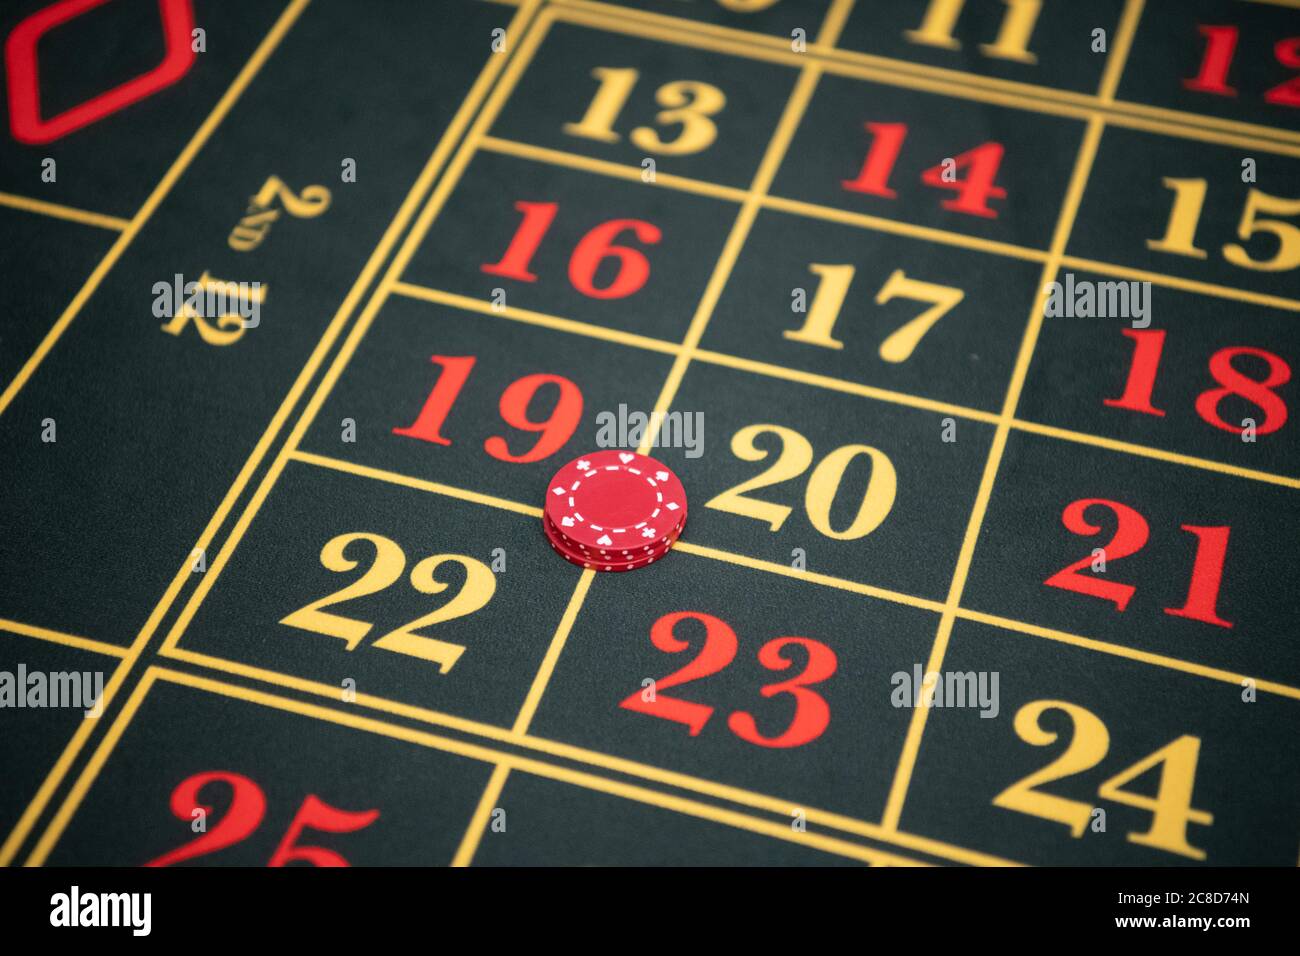 Play on a Roulette Table in a Casino. Numbers Red and Yellow on a Green Table. Stock Photo